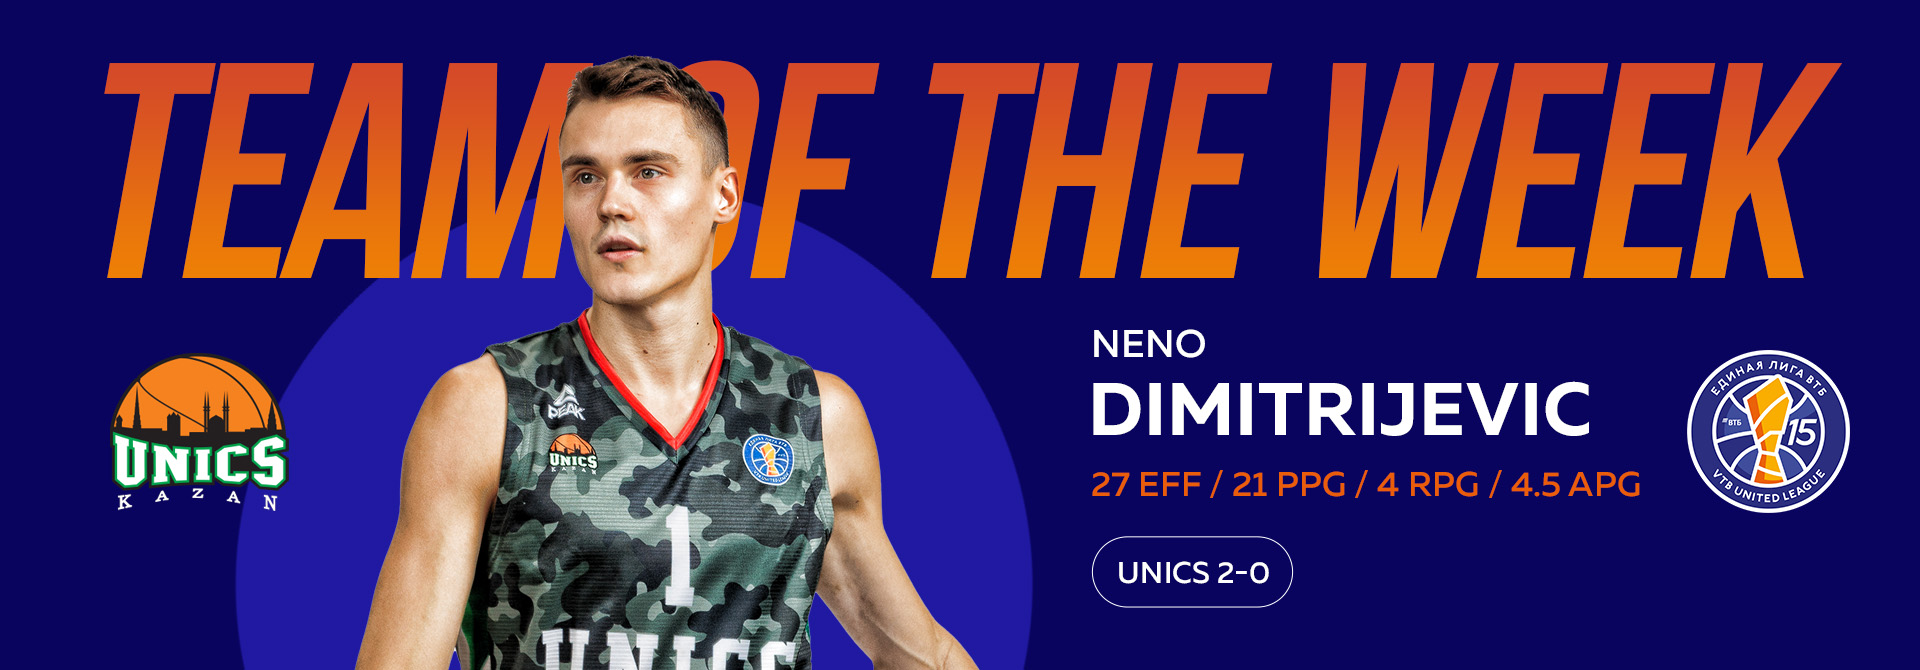 Nenad Dimitrijevic was included in the All-VTB Team of the Week!